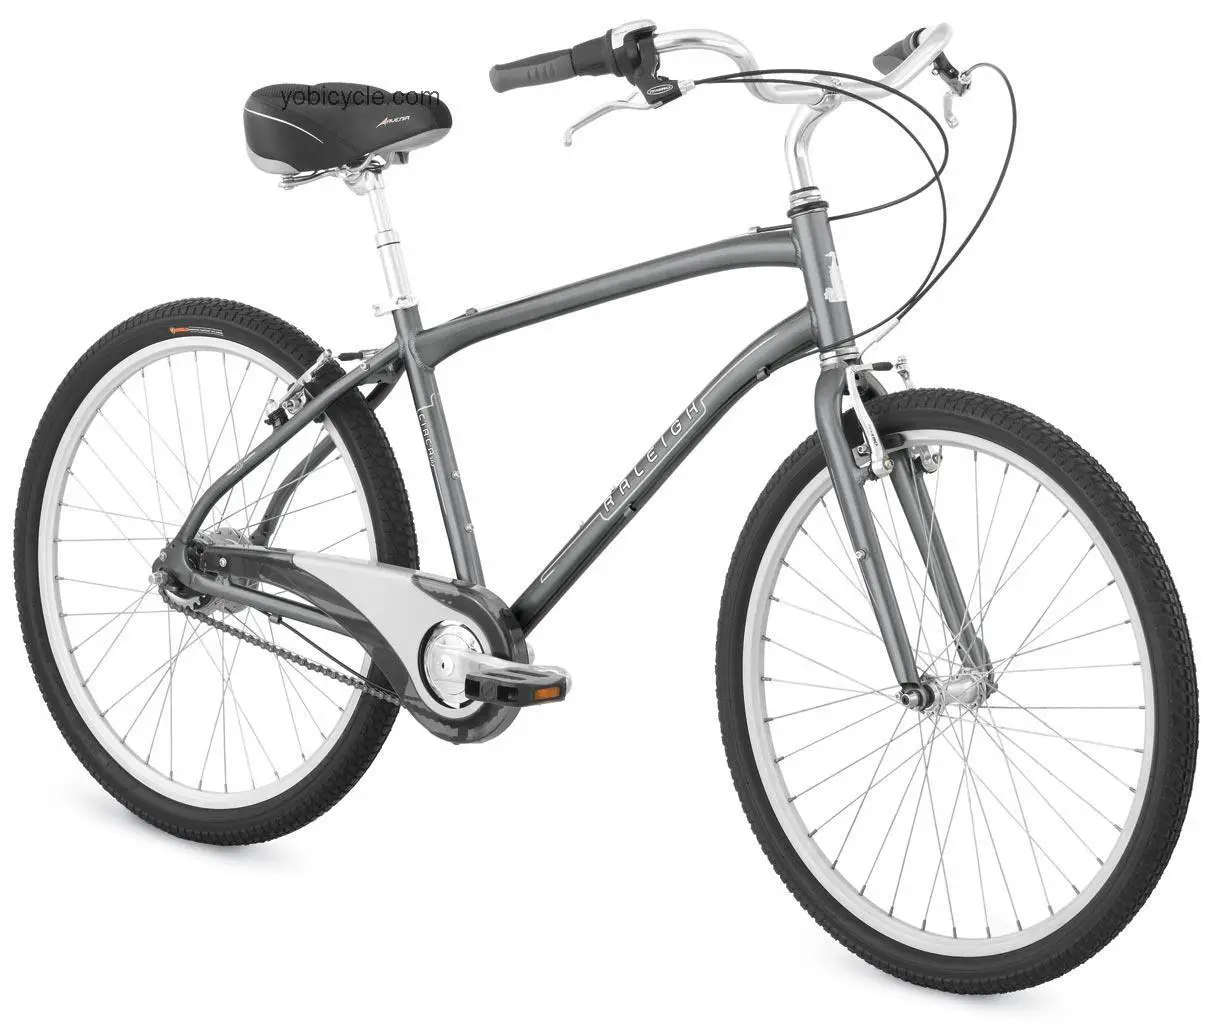 Raleigh  Circa 2.0 Technical data and specifications